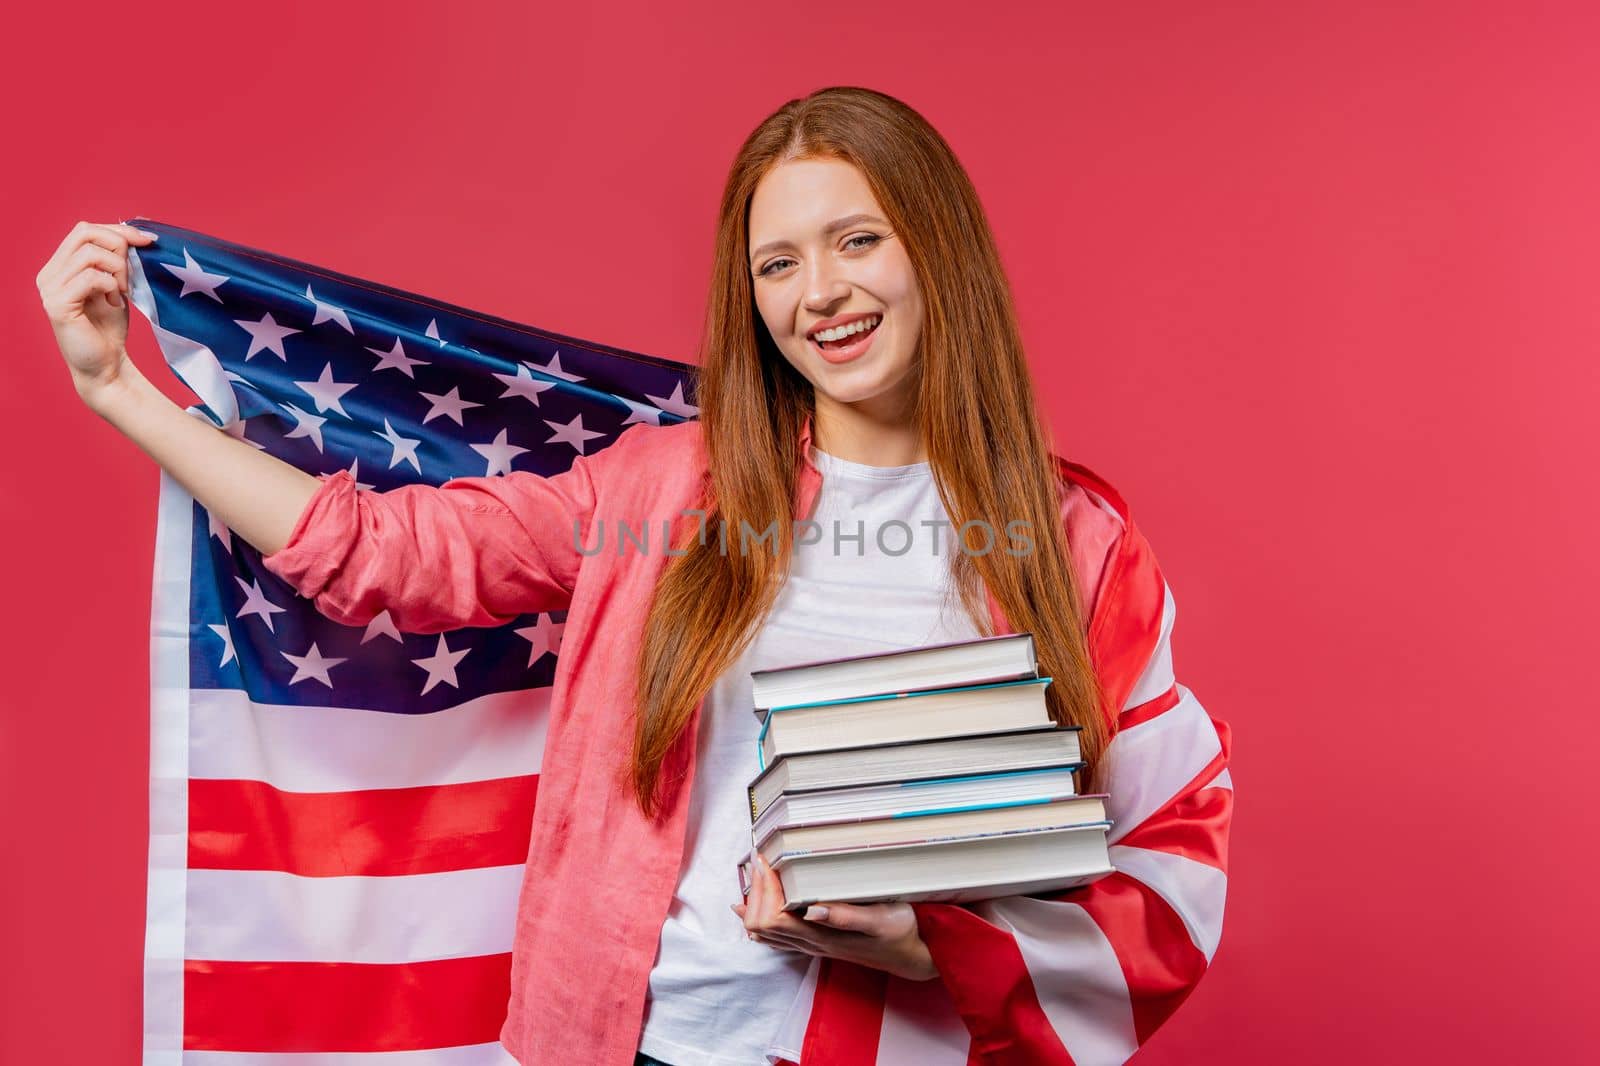 American woman student holds stack of university books from college library on pink background. Happy girl smiles, she is happy to graduate in USA, education abroad concept by kristina_kokhanova